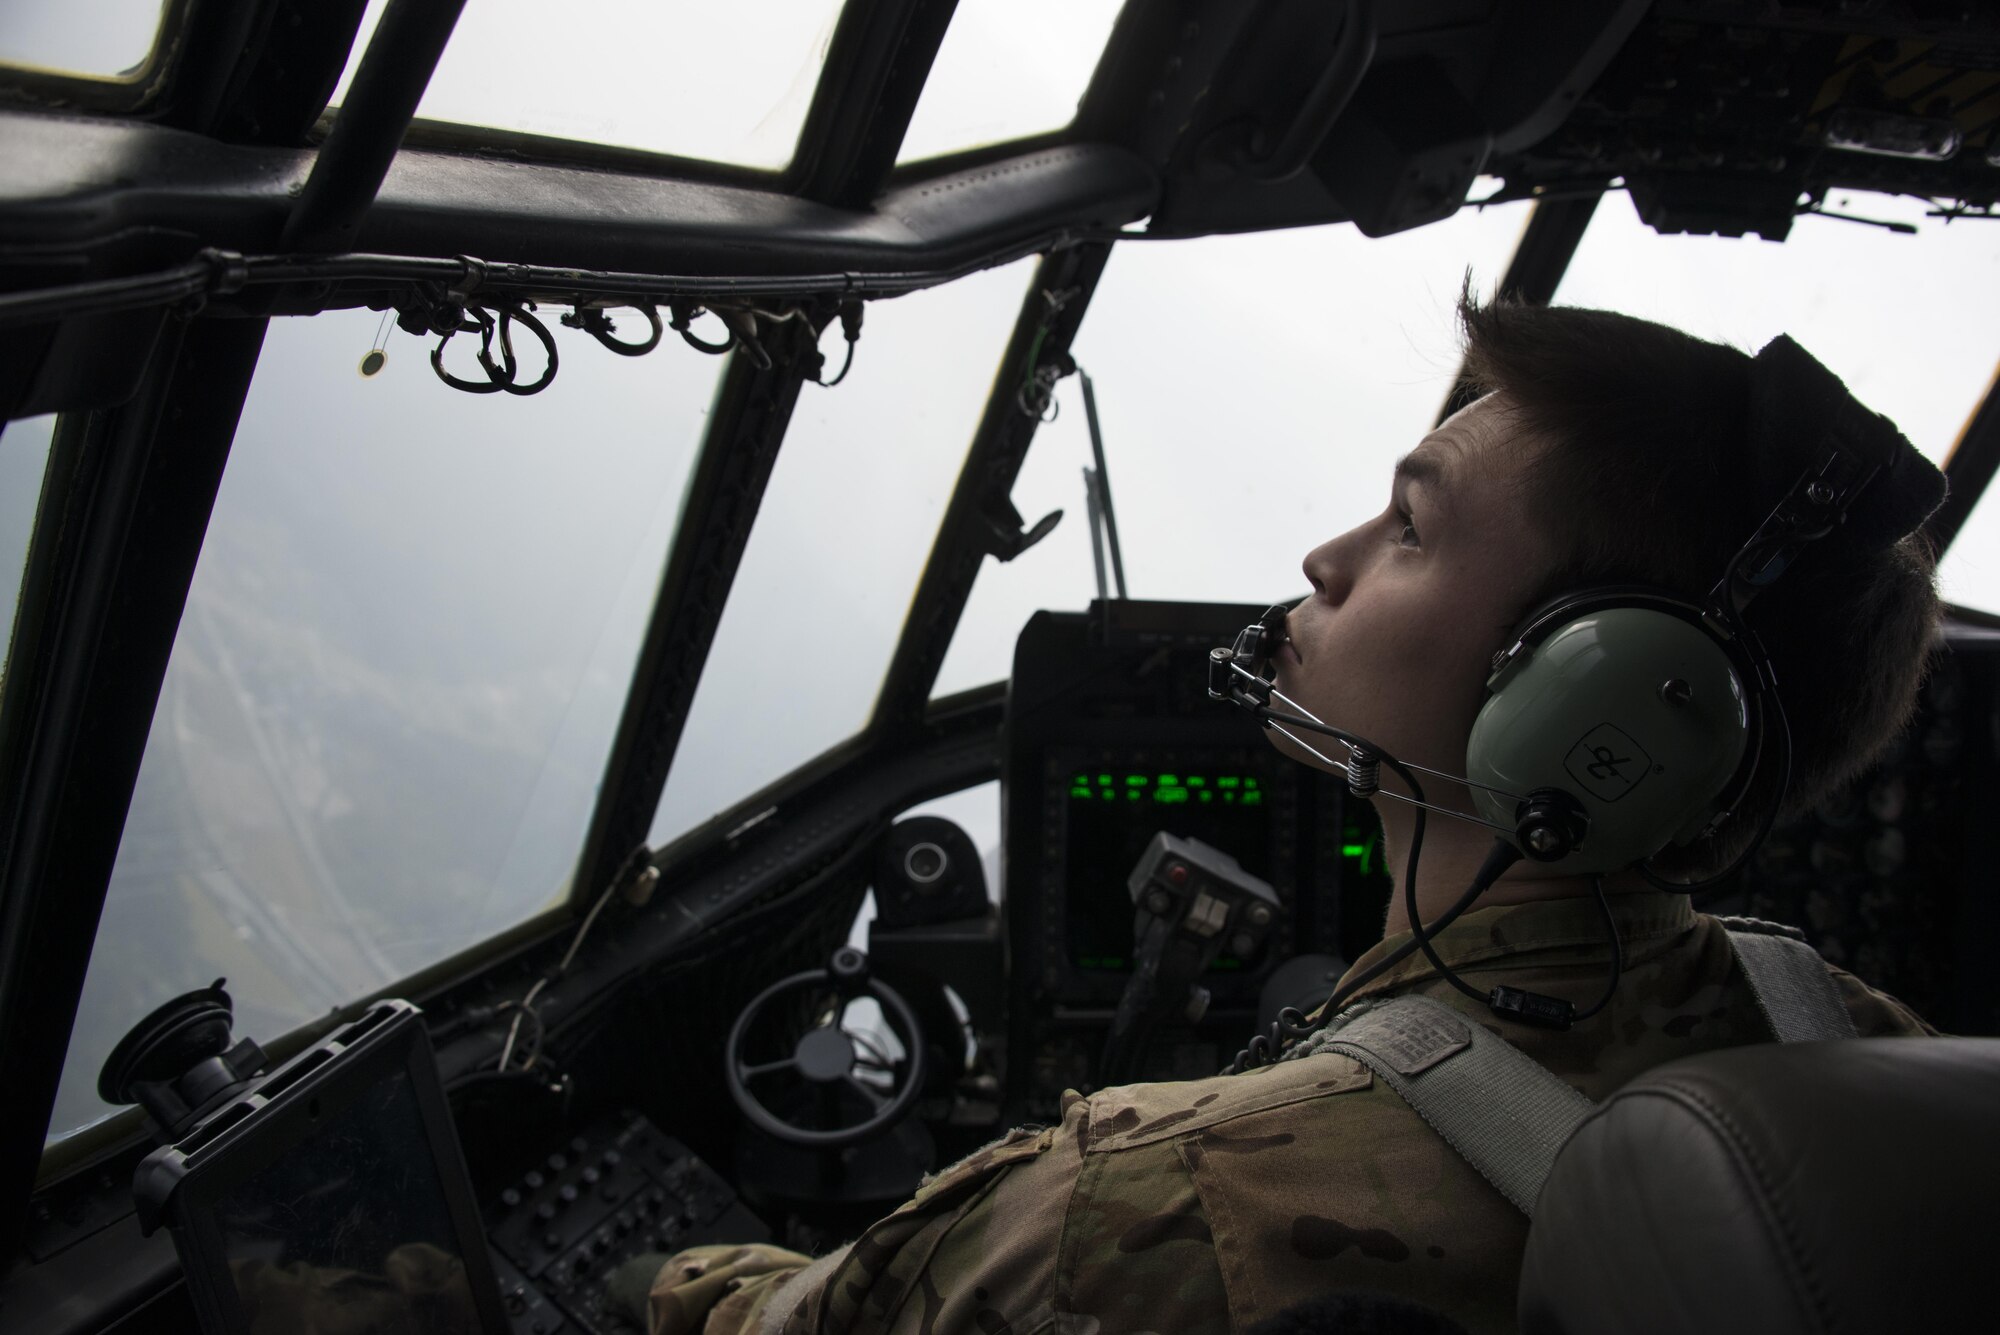 Capt. Andrew Bryant, 1st Special Operations Squadron aircraft commander, flies the MC-130H Combat Talon II during low-level air intercept (AI) training with three F-16C Fighting Falcons from the 35th Fighter Squadron at Kunsan Air Base, Oct. 19, 2016. This opportunity provided the 1st SOS and 35th FS crews with invaluable AI training. (U.S. Air Force photo by Capt. Jessica Tait)